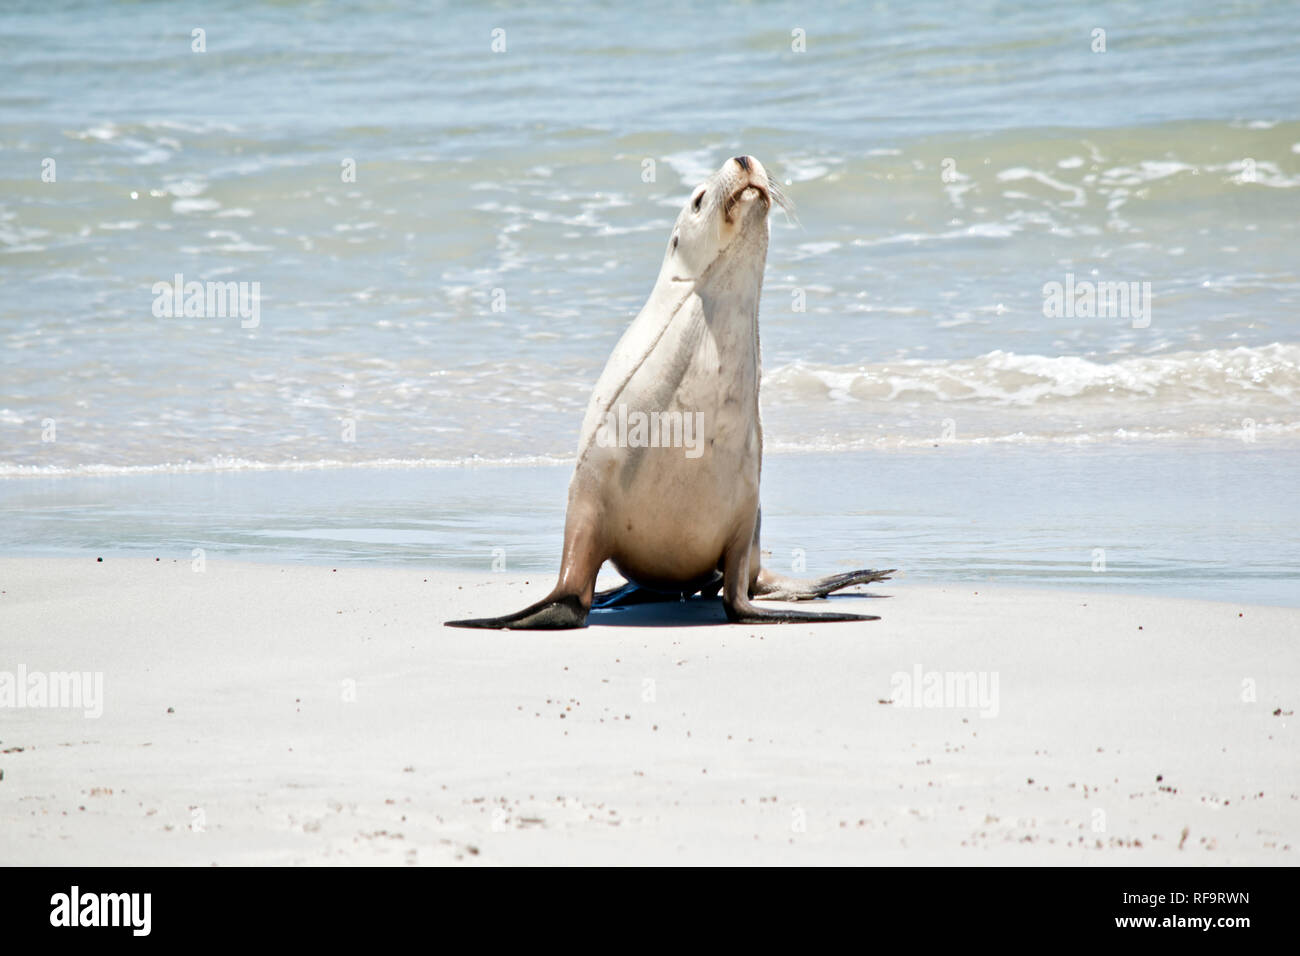 the sea lion has just come out of the water and is walking on the sand at Seal Bay, Australia Stock Photo